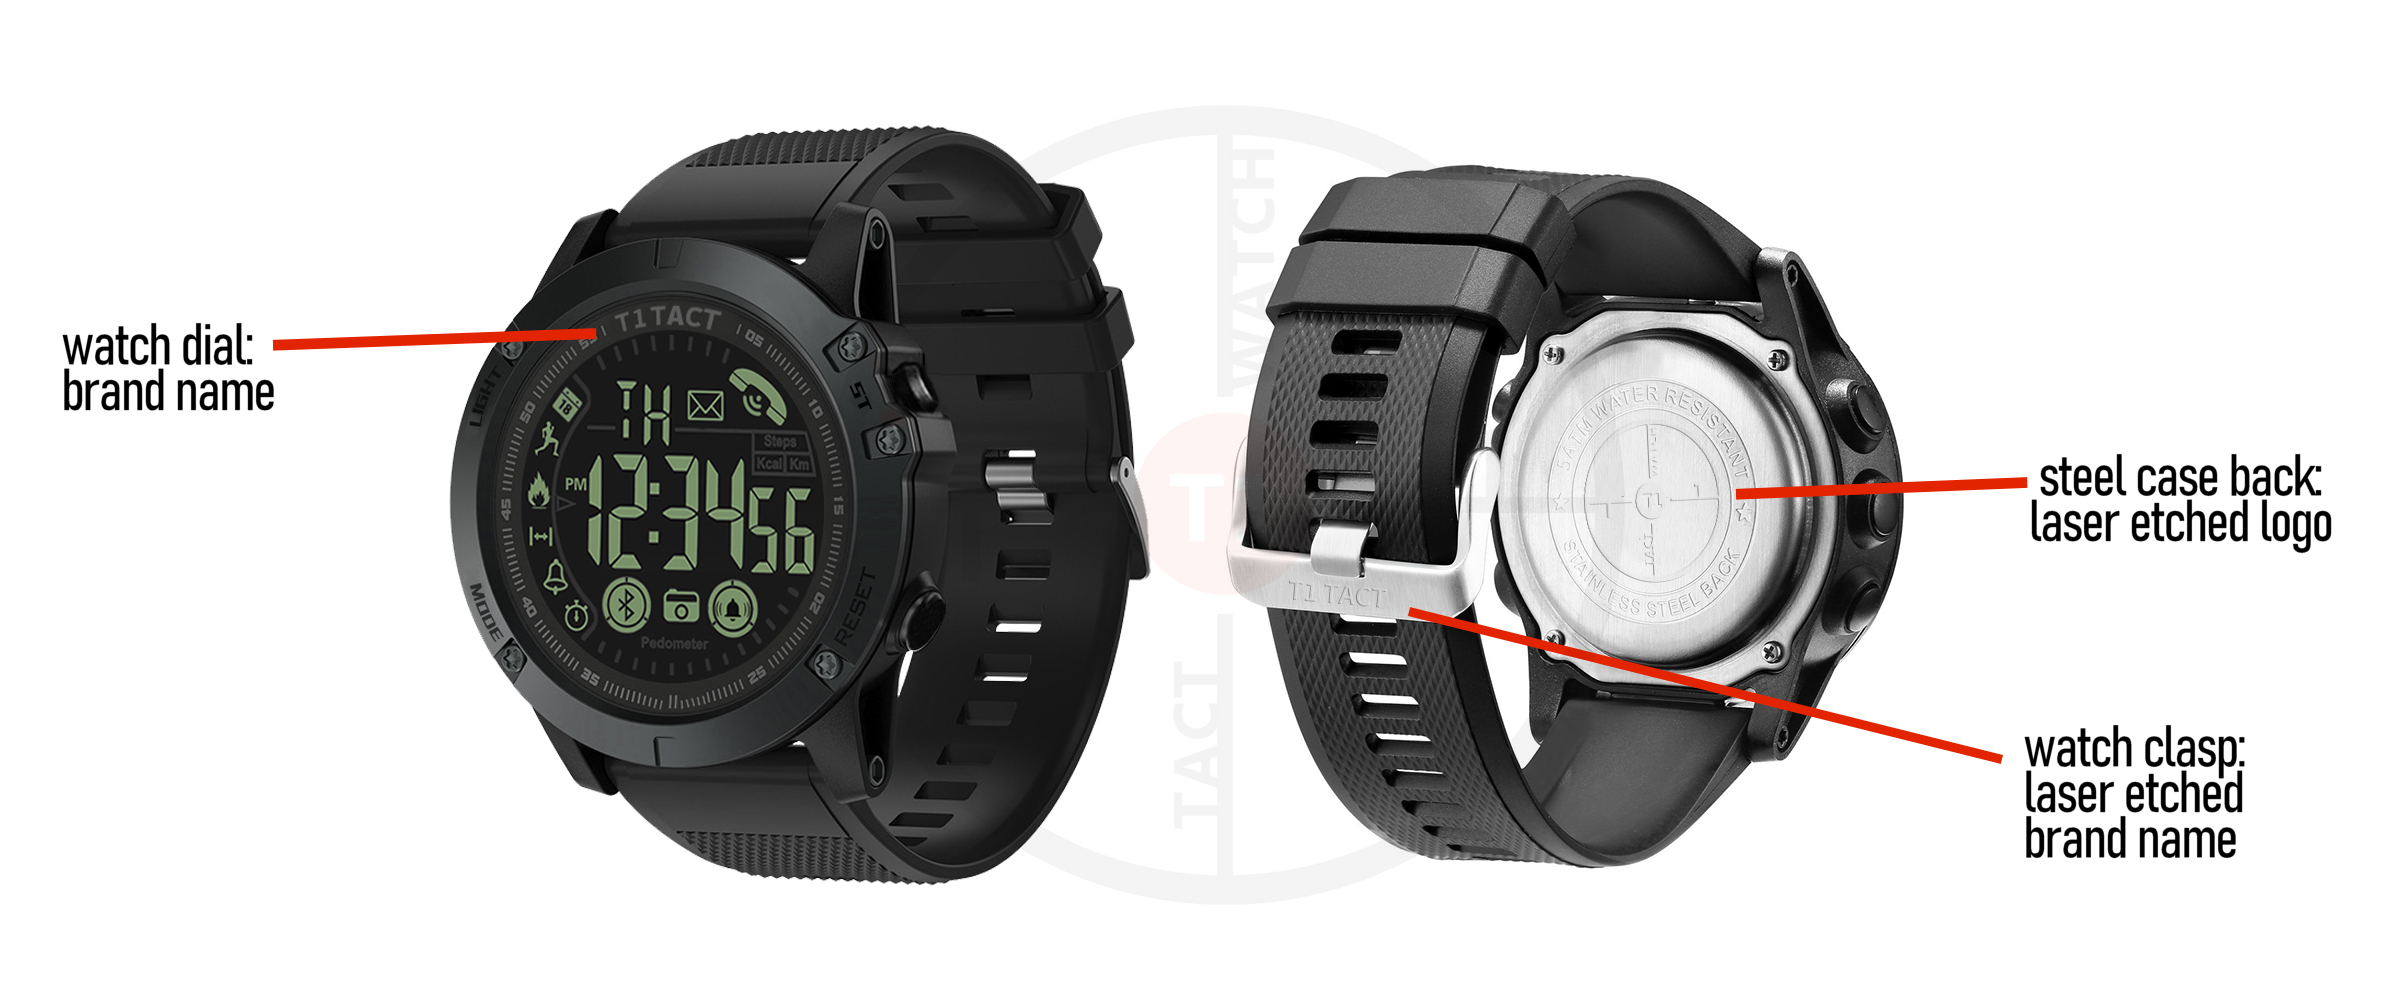 tact watch smartwatch review